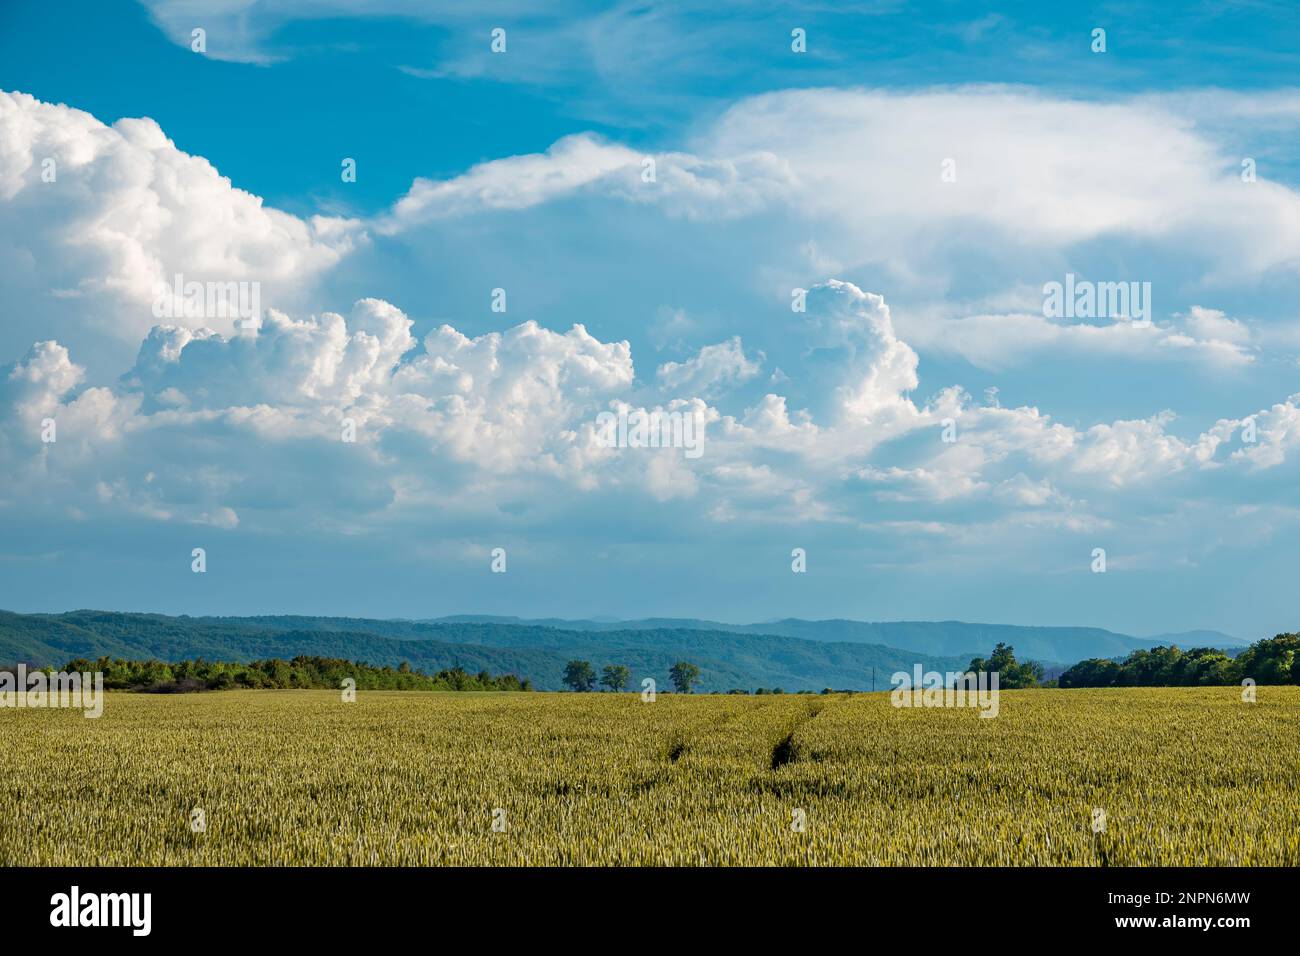 Wheat field and bright blue sky with clouds. Countryside landscape Stock Photo